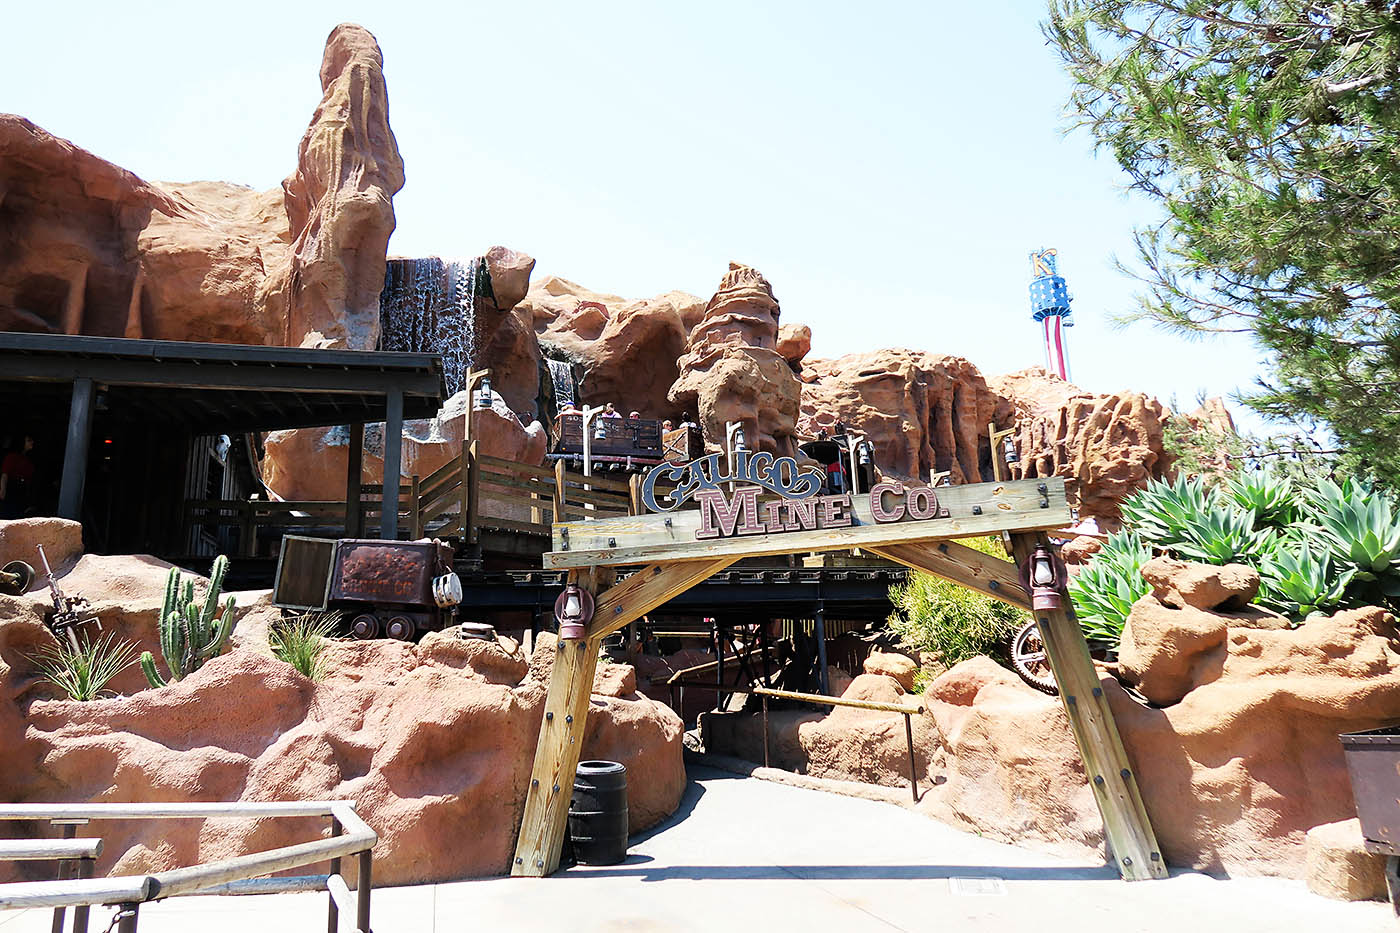 Why You Should Visit Knott's Berry Farm Before Summer Is Over